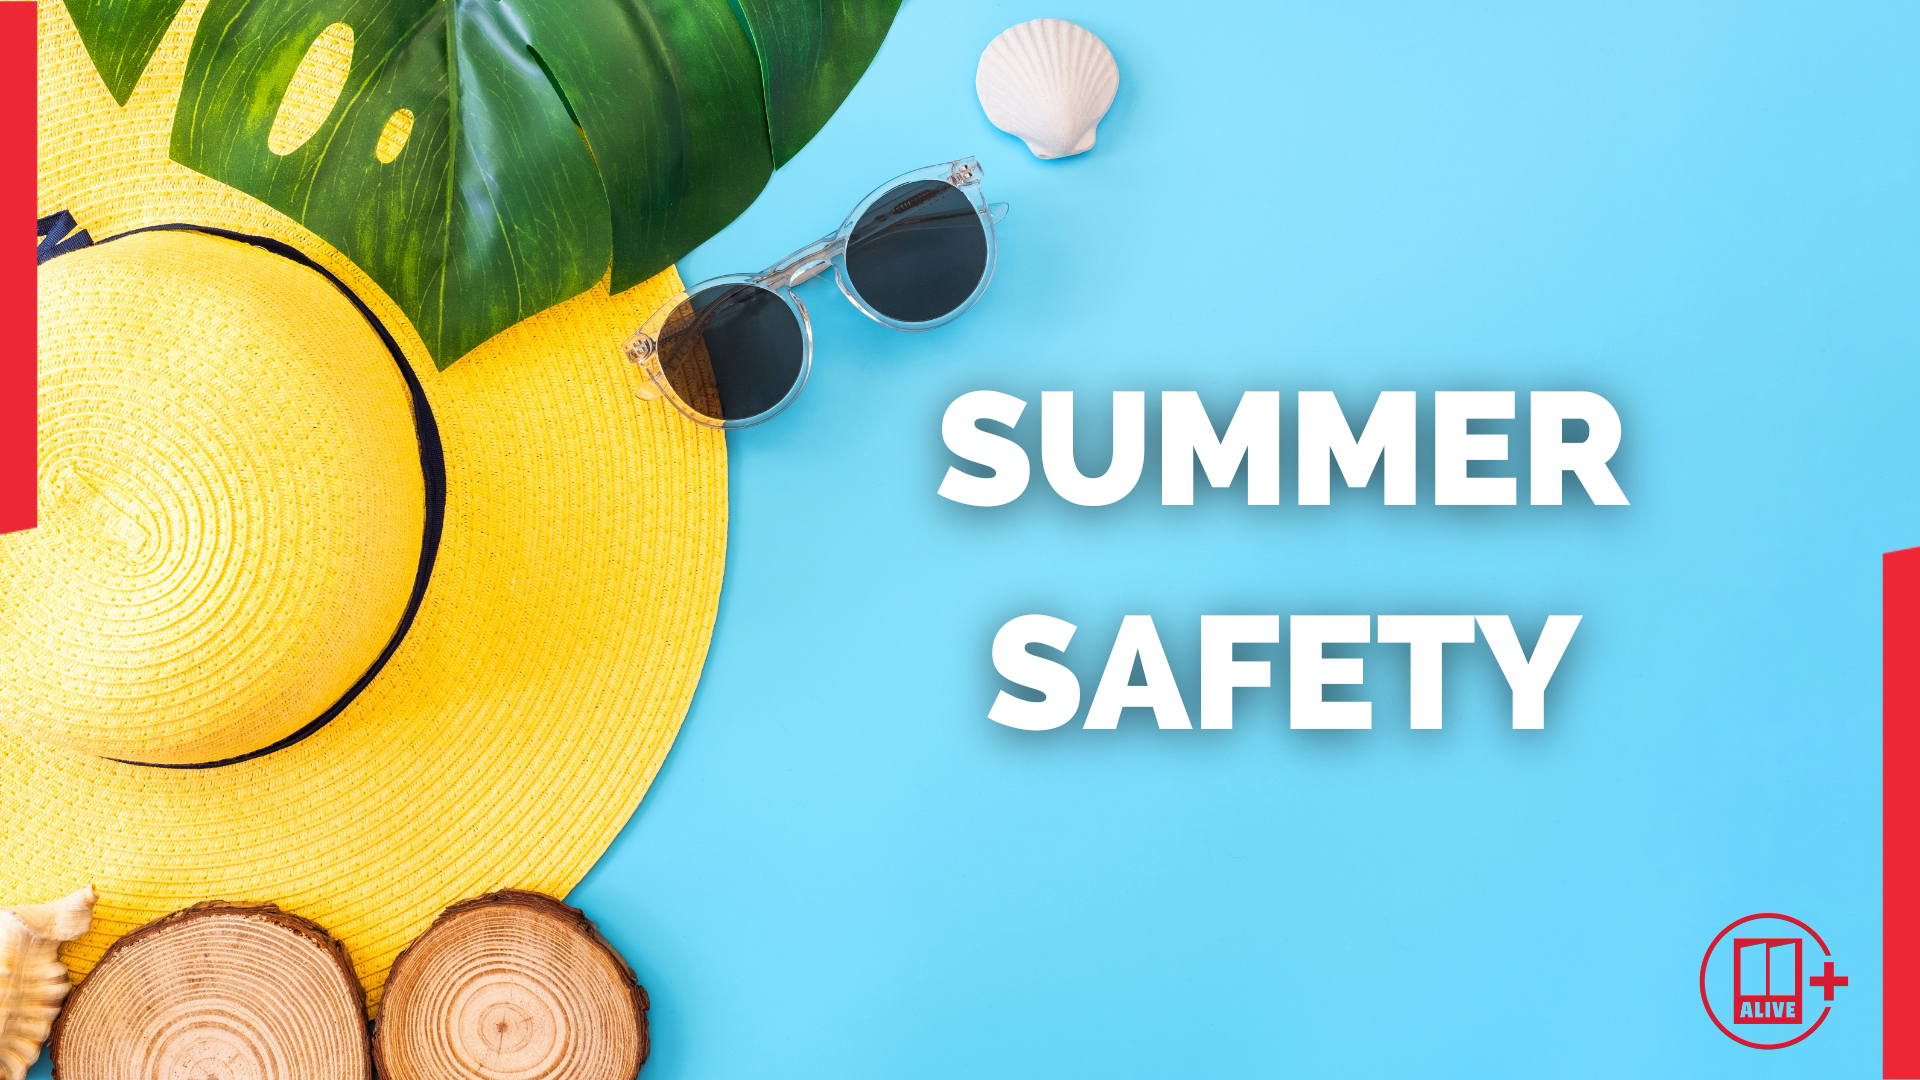 As school gets out and the temperature goes up, 11Alive is making sure the summer season is a safe and healthy time for you and your family.